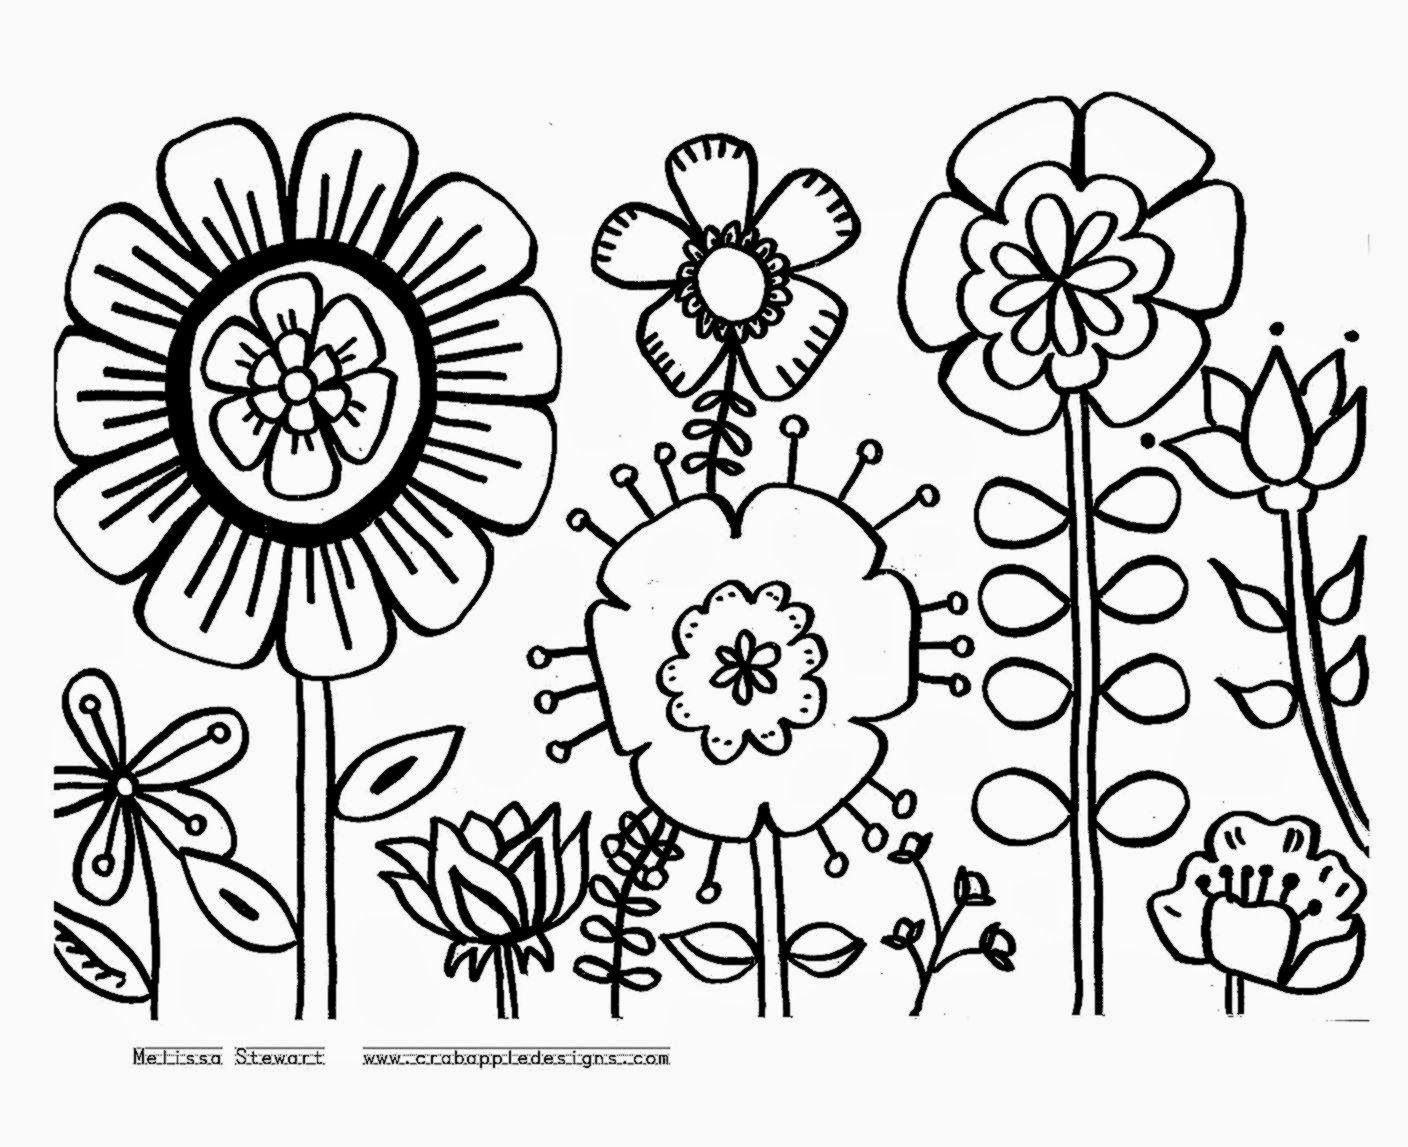 Flowers Coloring Sheets | Free Coloring Sheet